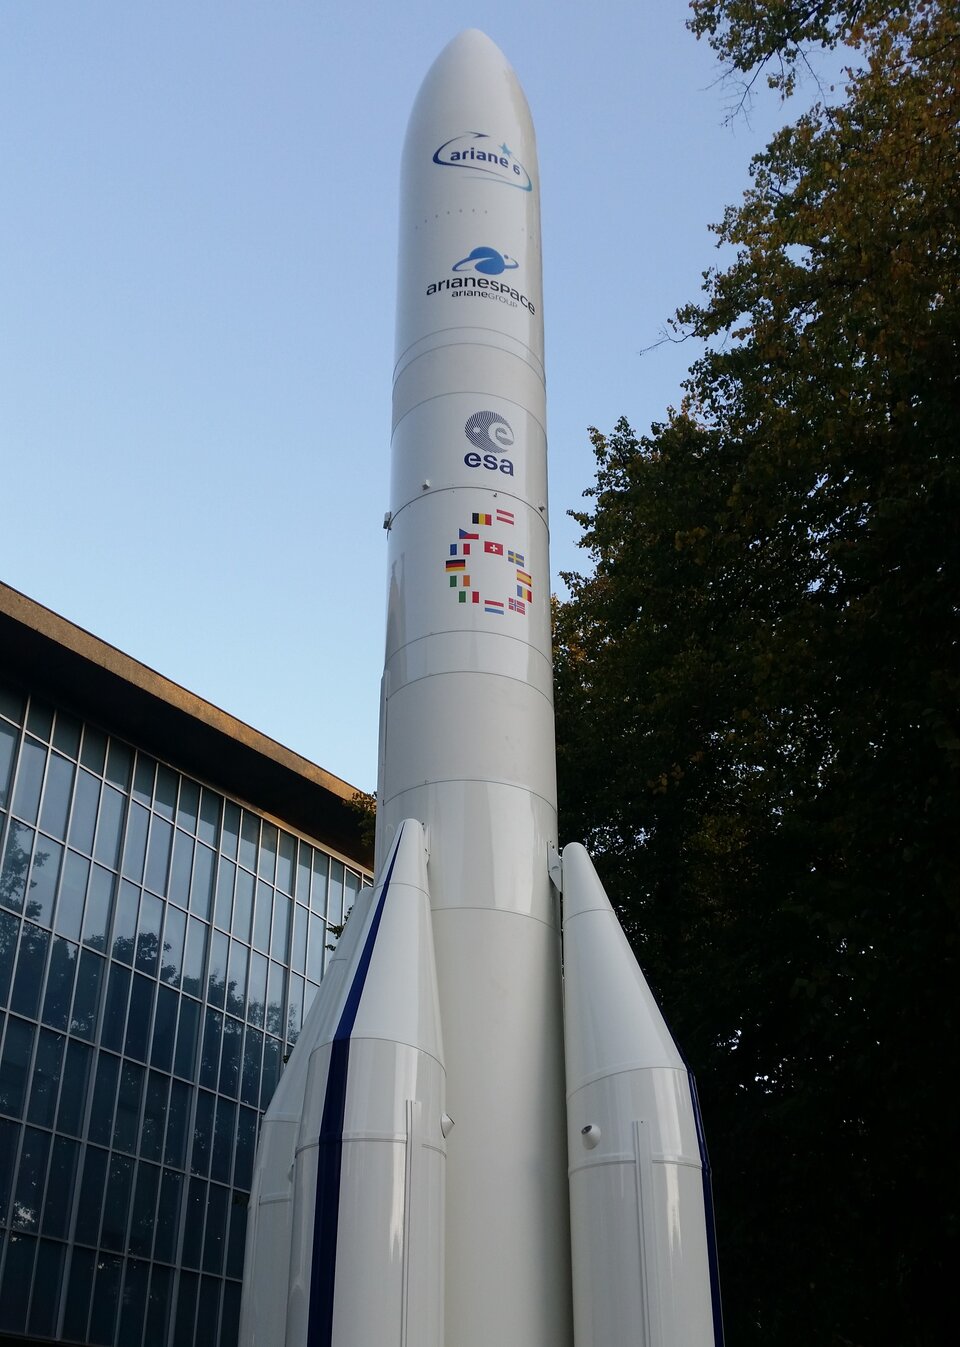 The 1:10 scale model of Ariane 6 outside the Design Museum in London